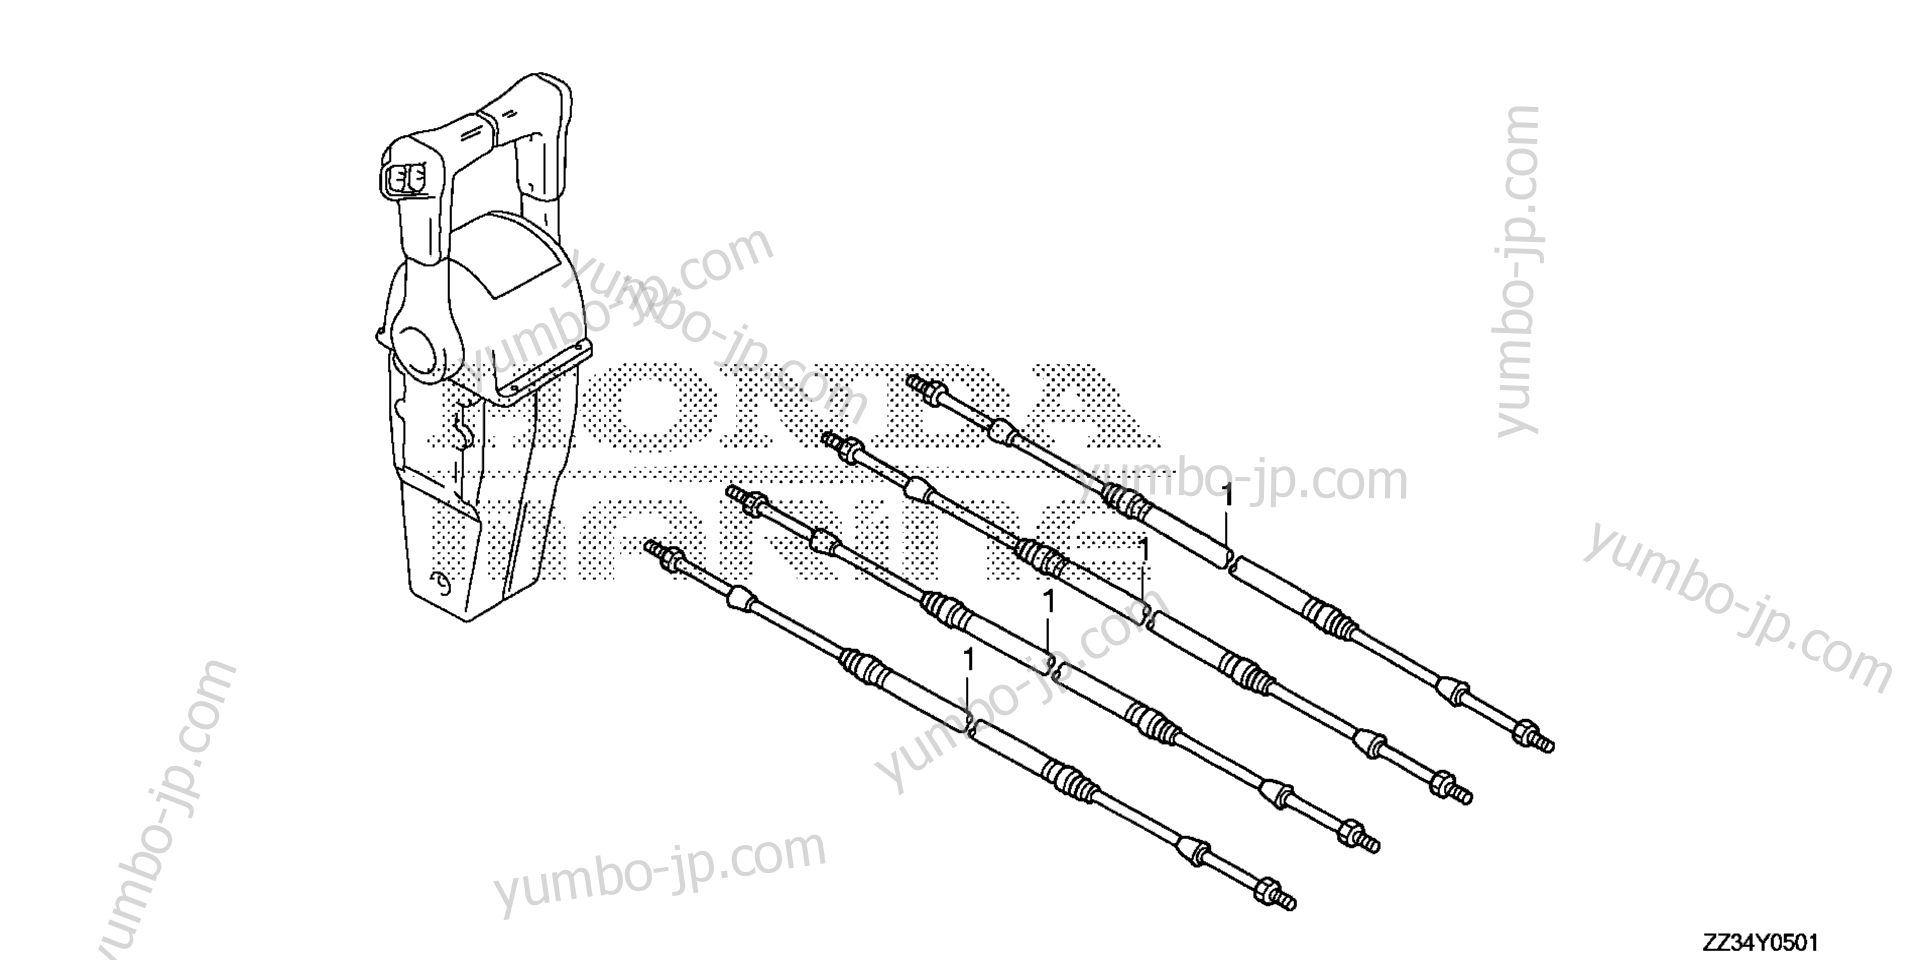 CABLE (DUAL) for Marine Diesel HONDA BF60A XRTA 